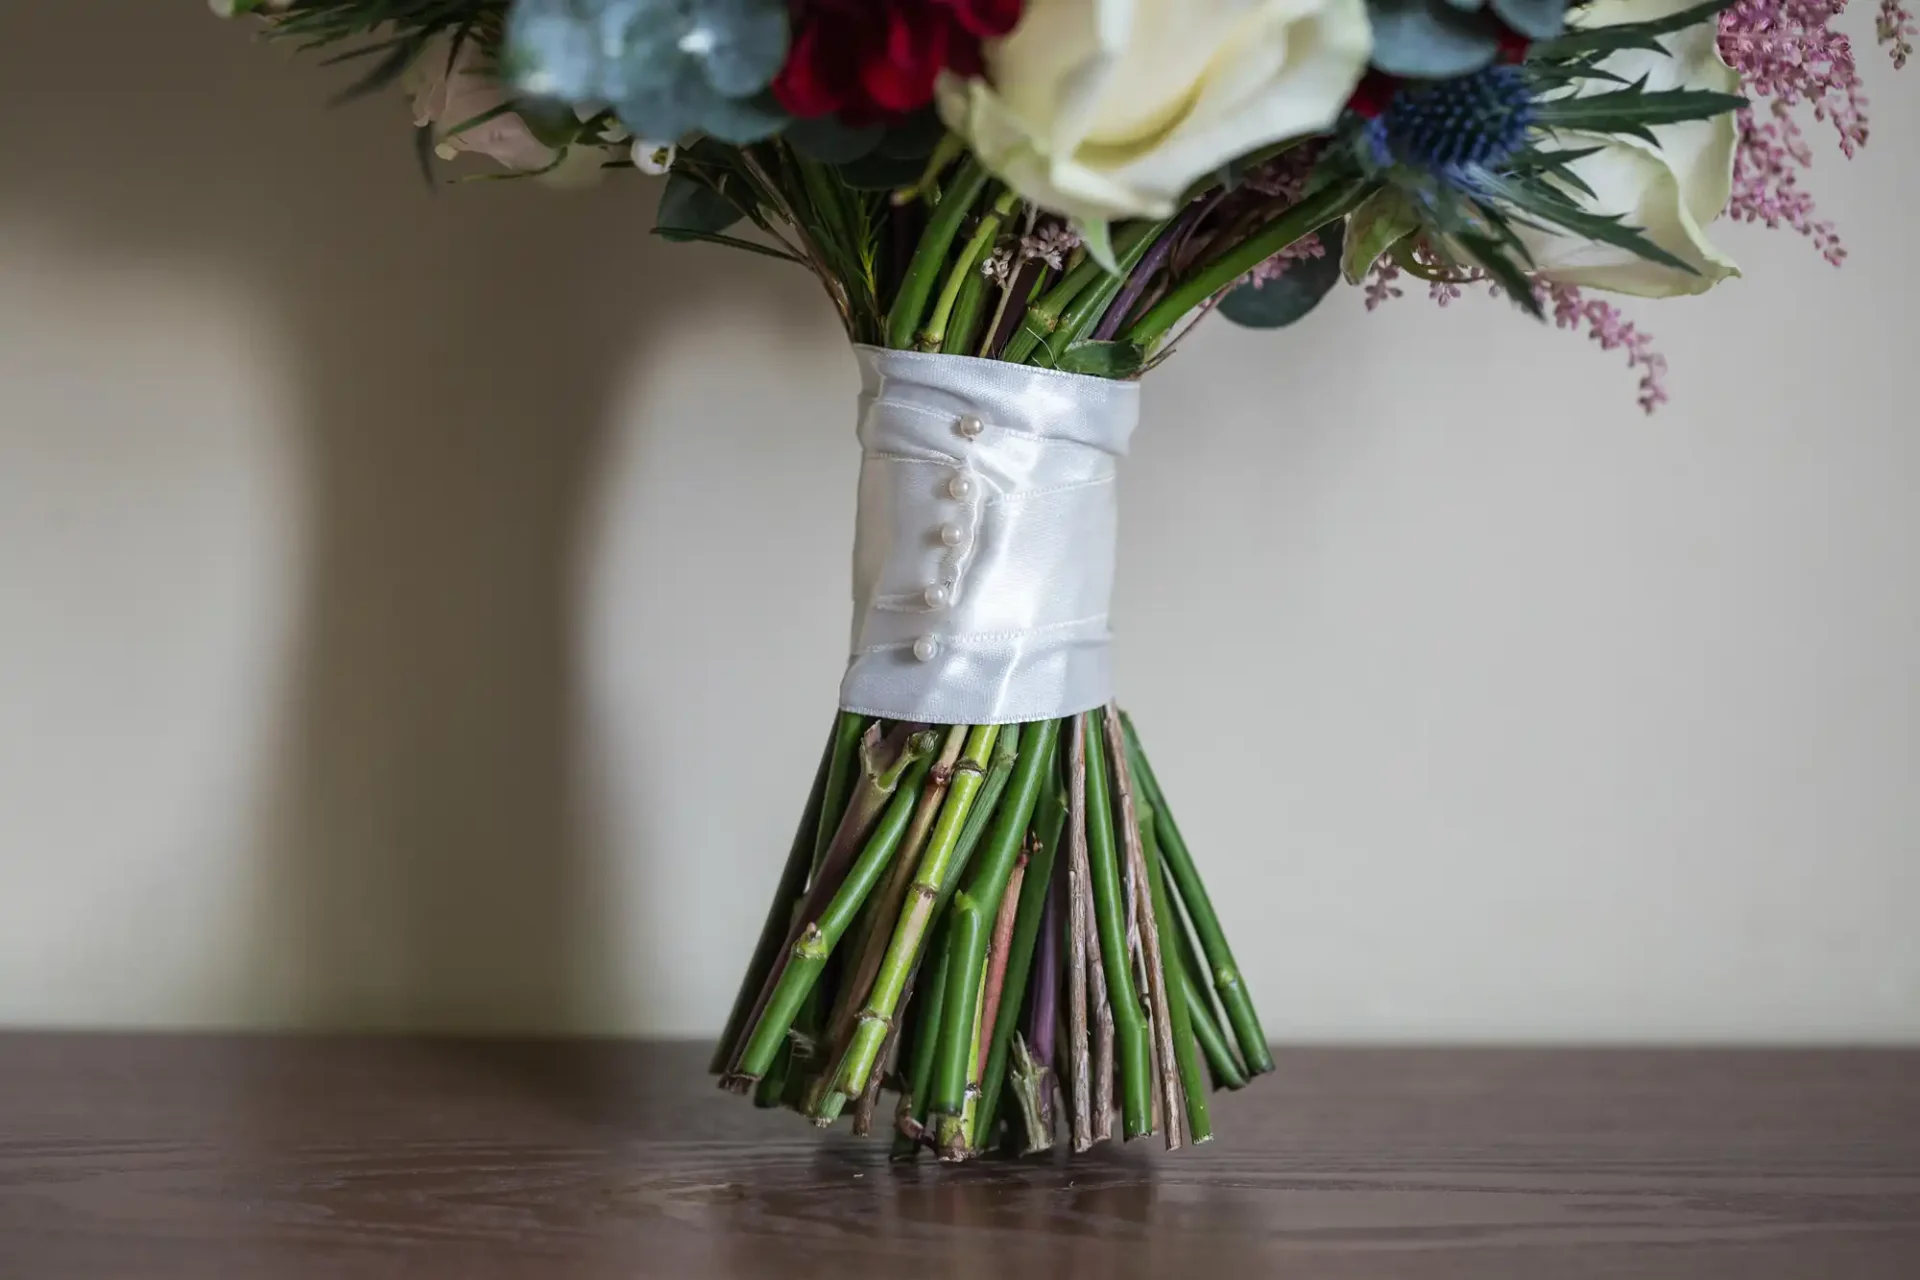 A bridal bouquet with a white satin ribbon handle decorated with pearl buttons, placed on a wooden surface.